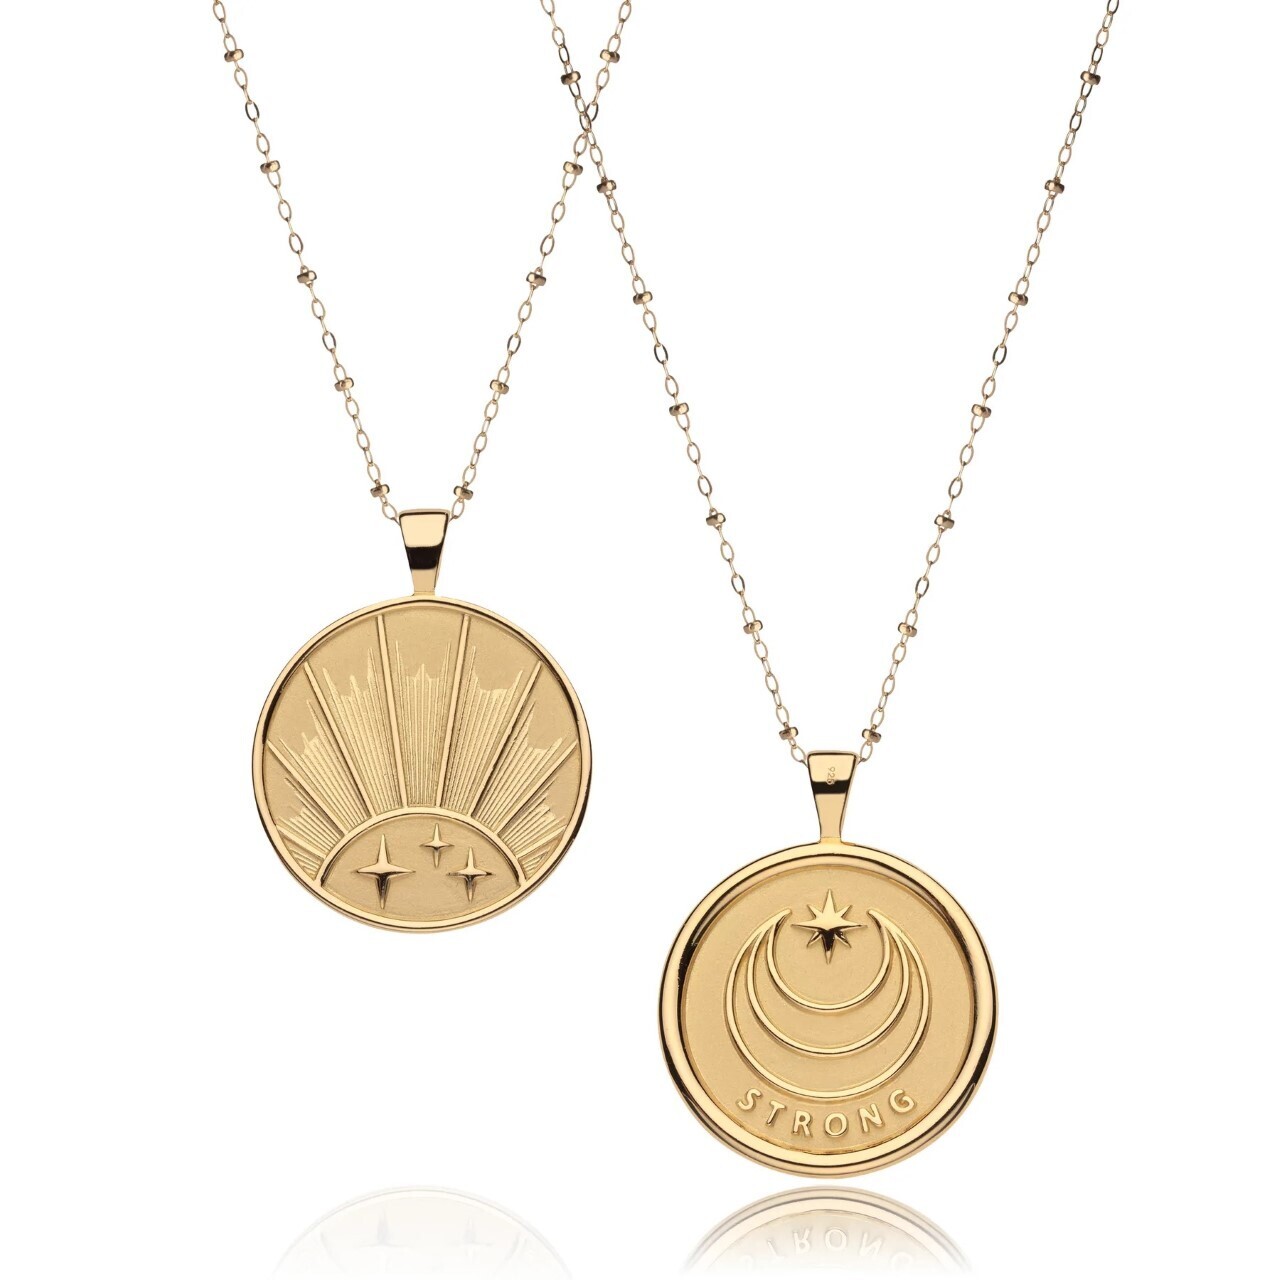 Jane Win Original STRONG Rising Sun Coin Pendant with Satellite Chain